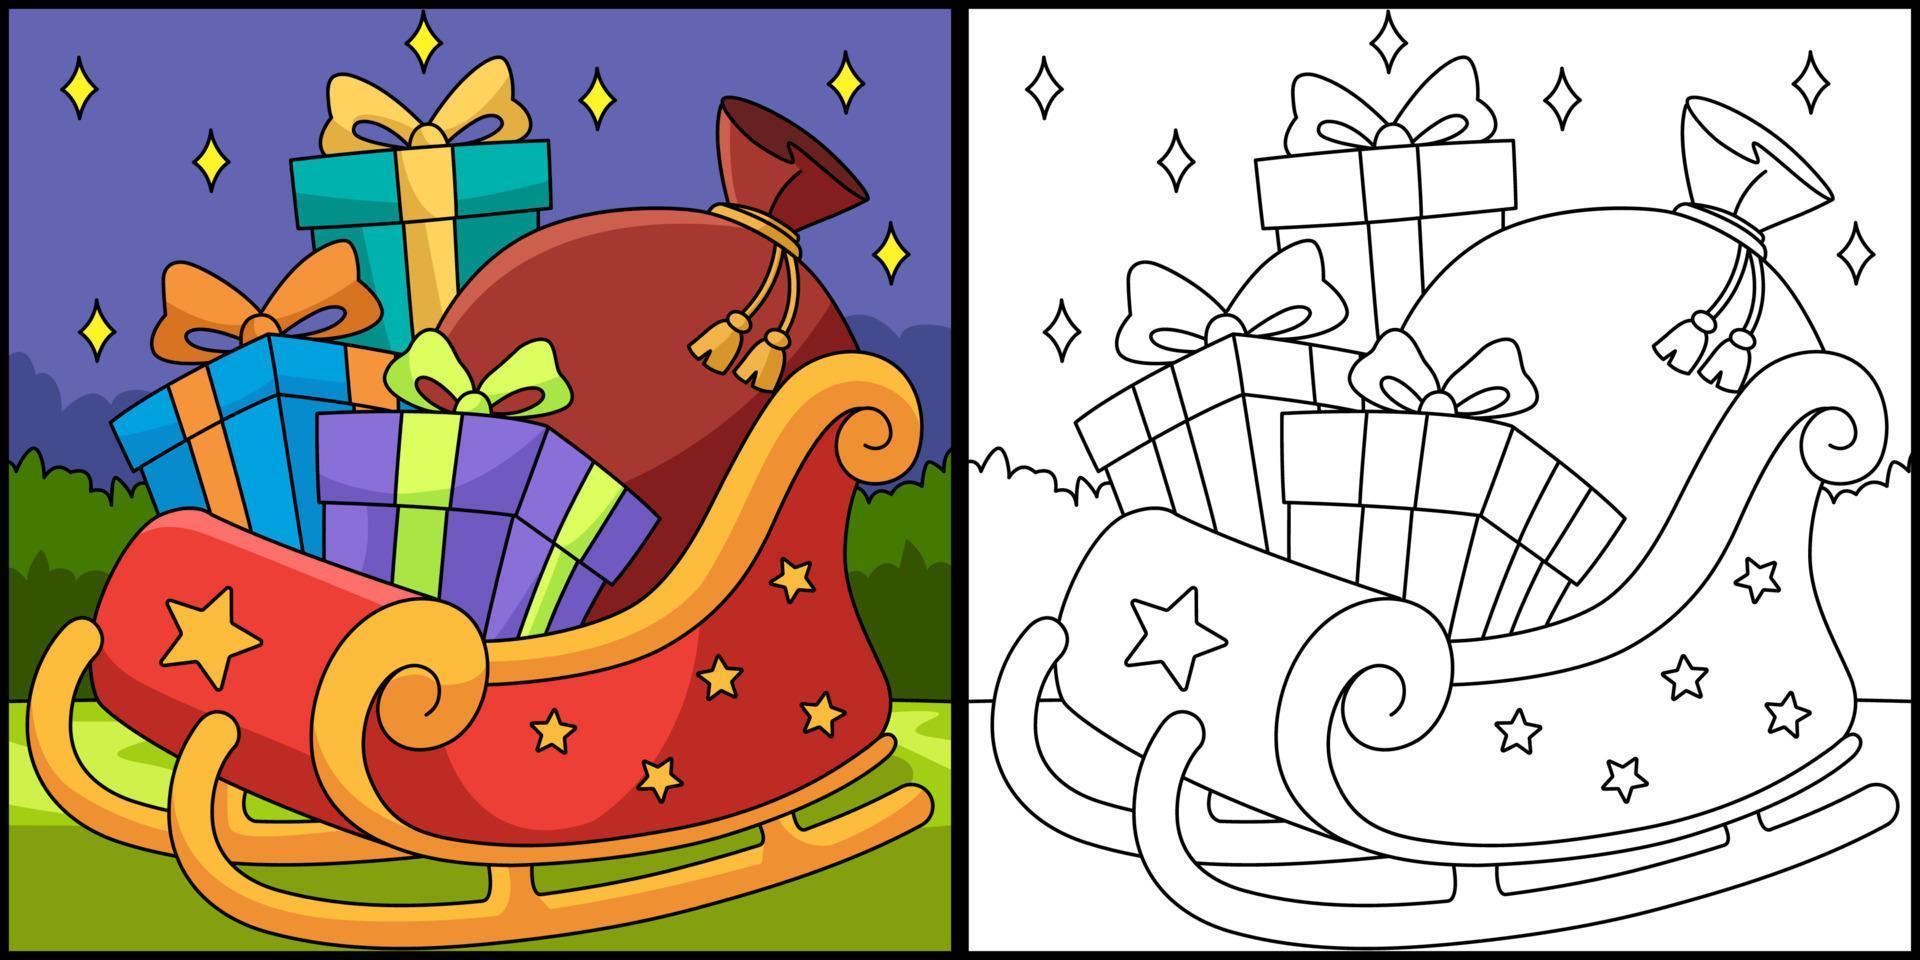 Christmas Sleigh Coloring Page Illustration vector